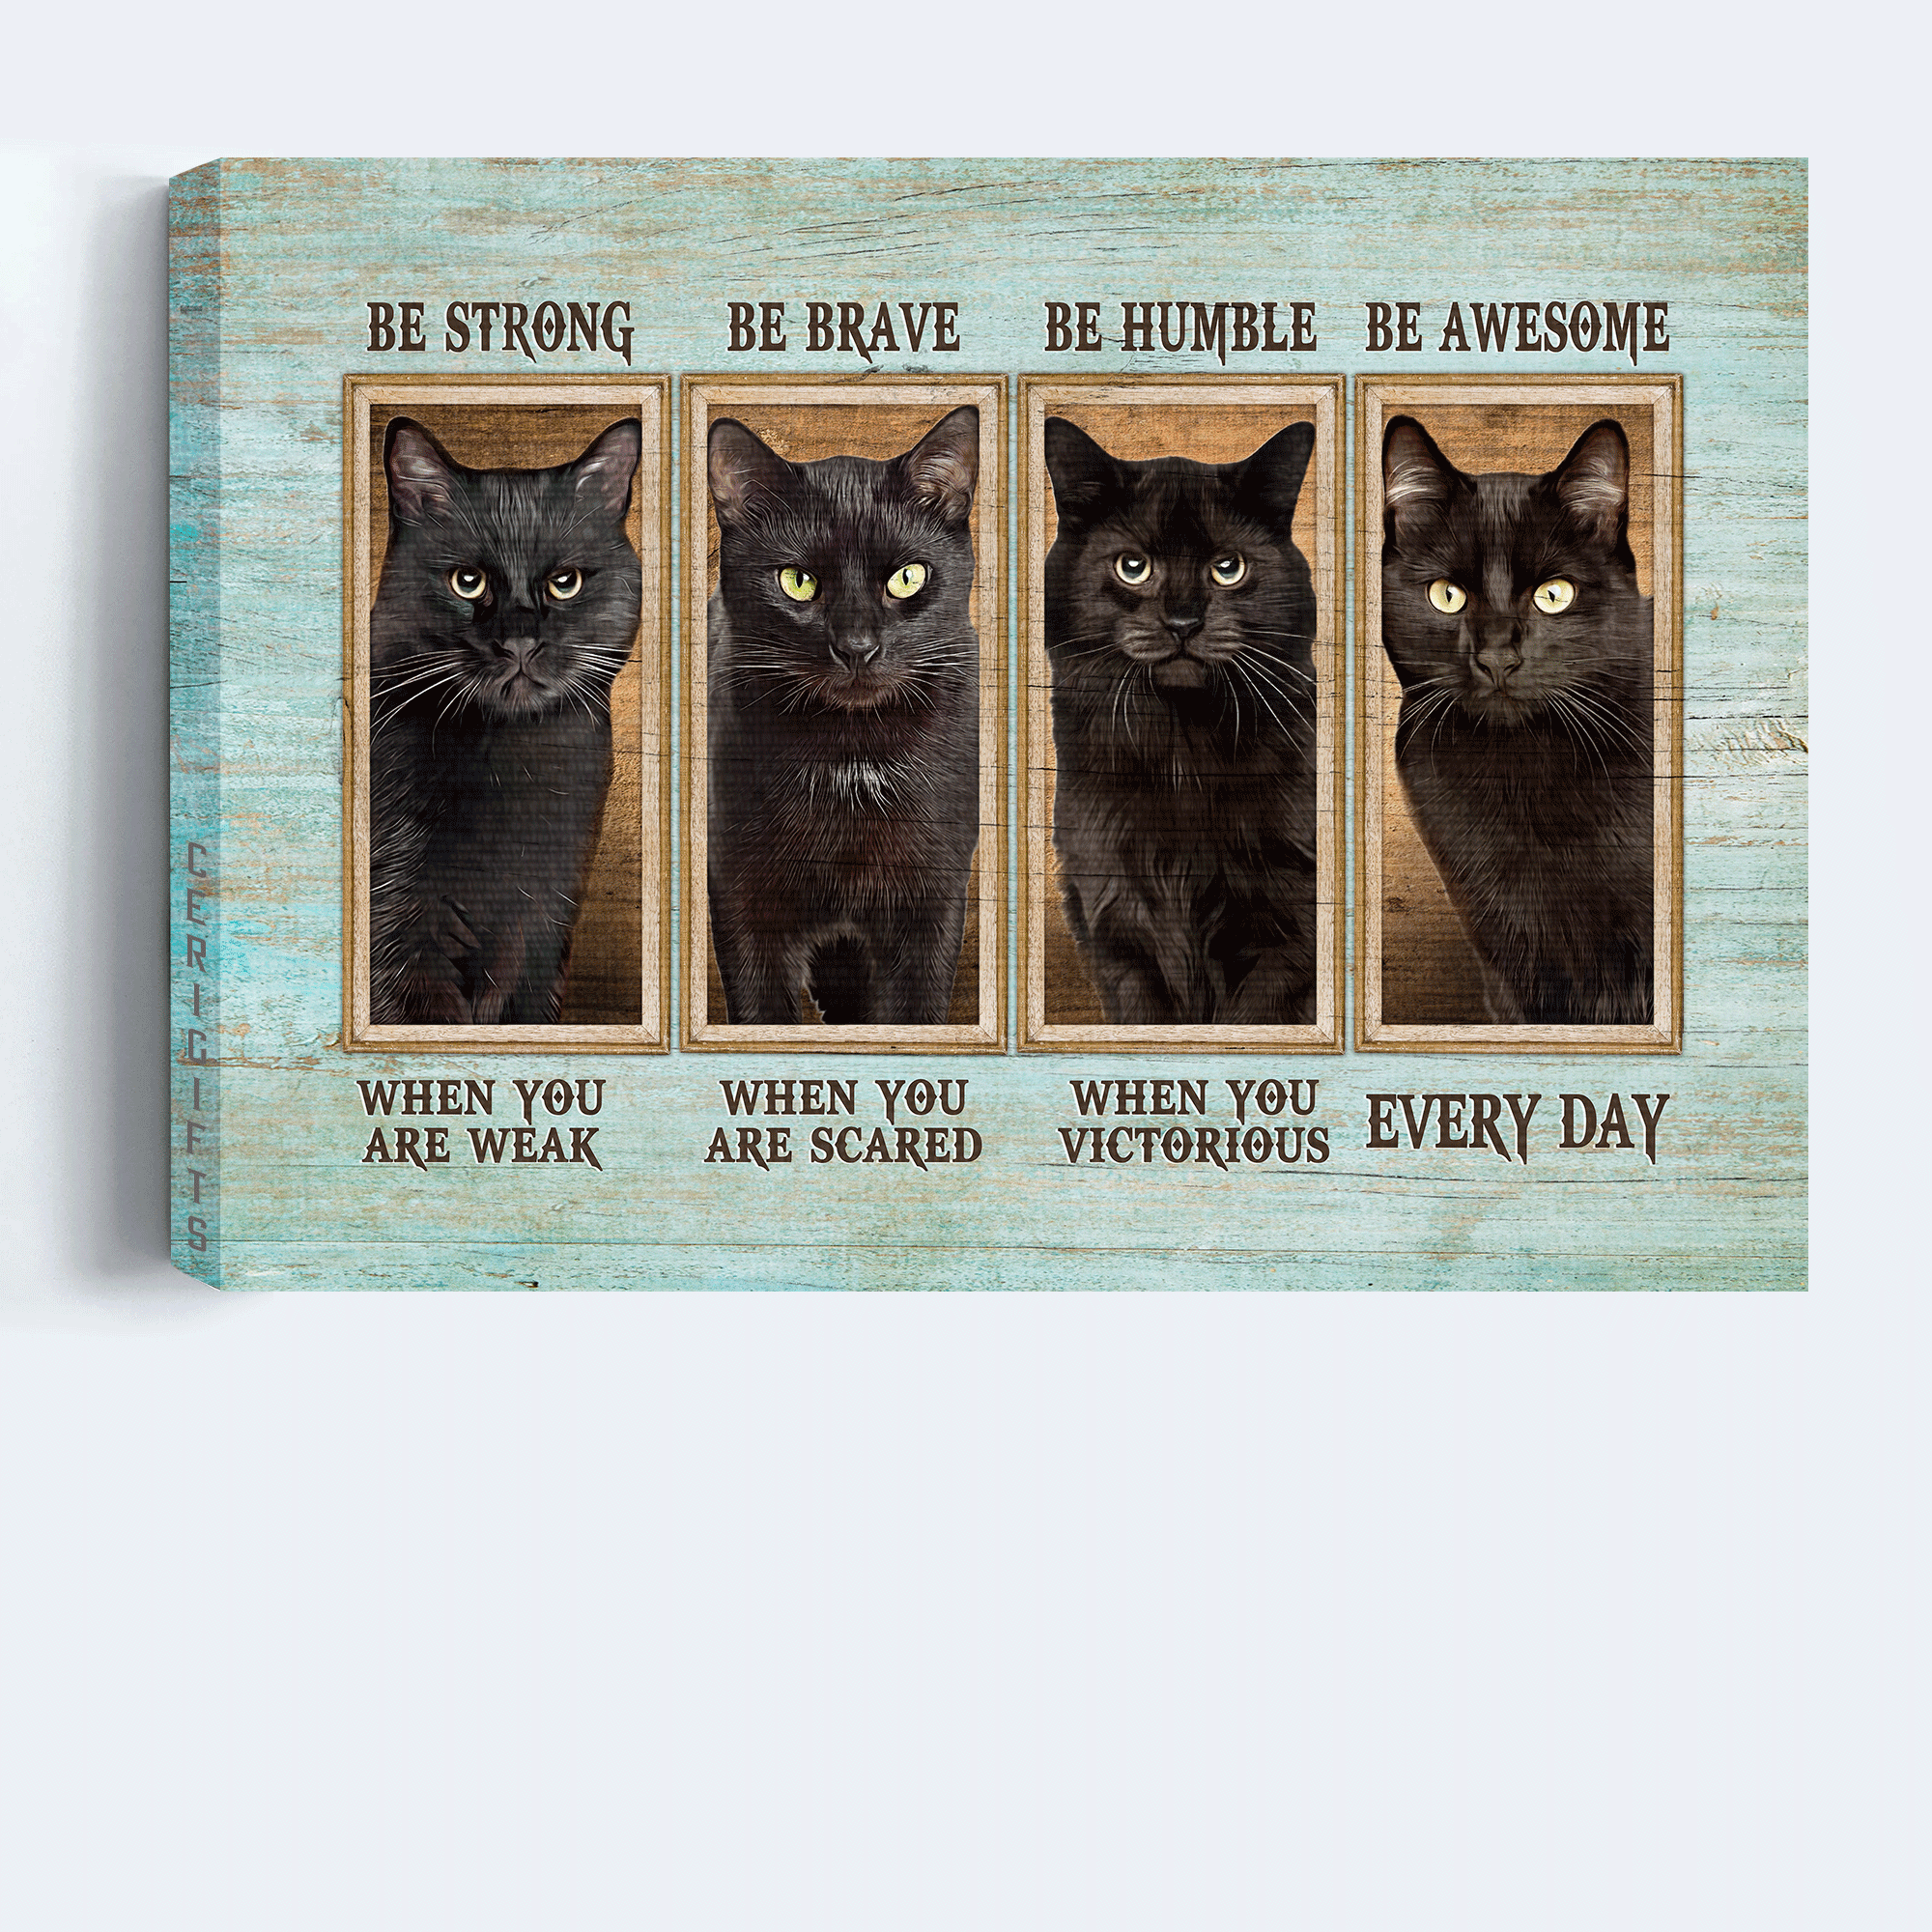 Black Cat & Jesus Premium Wrapped Landscape Canvas - Black Cat Painting, Be Awesome Everyday - Gift For Christian, Black Cat Lovers - Amzanimalsgift